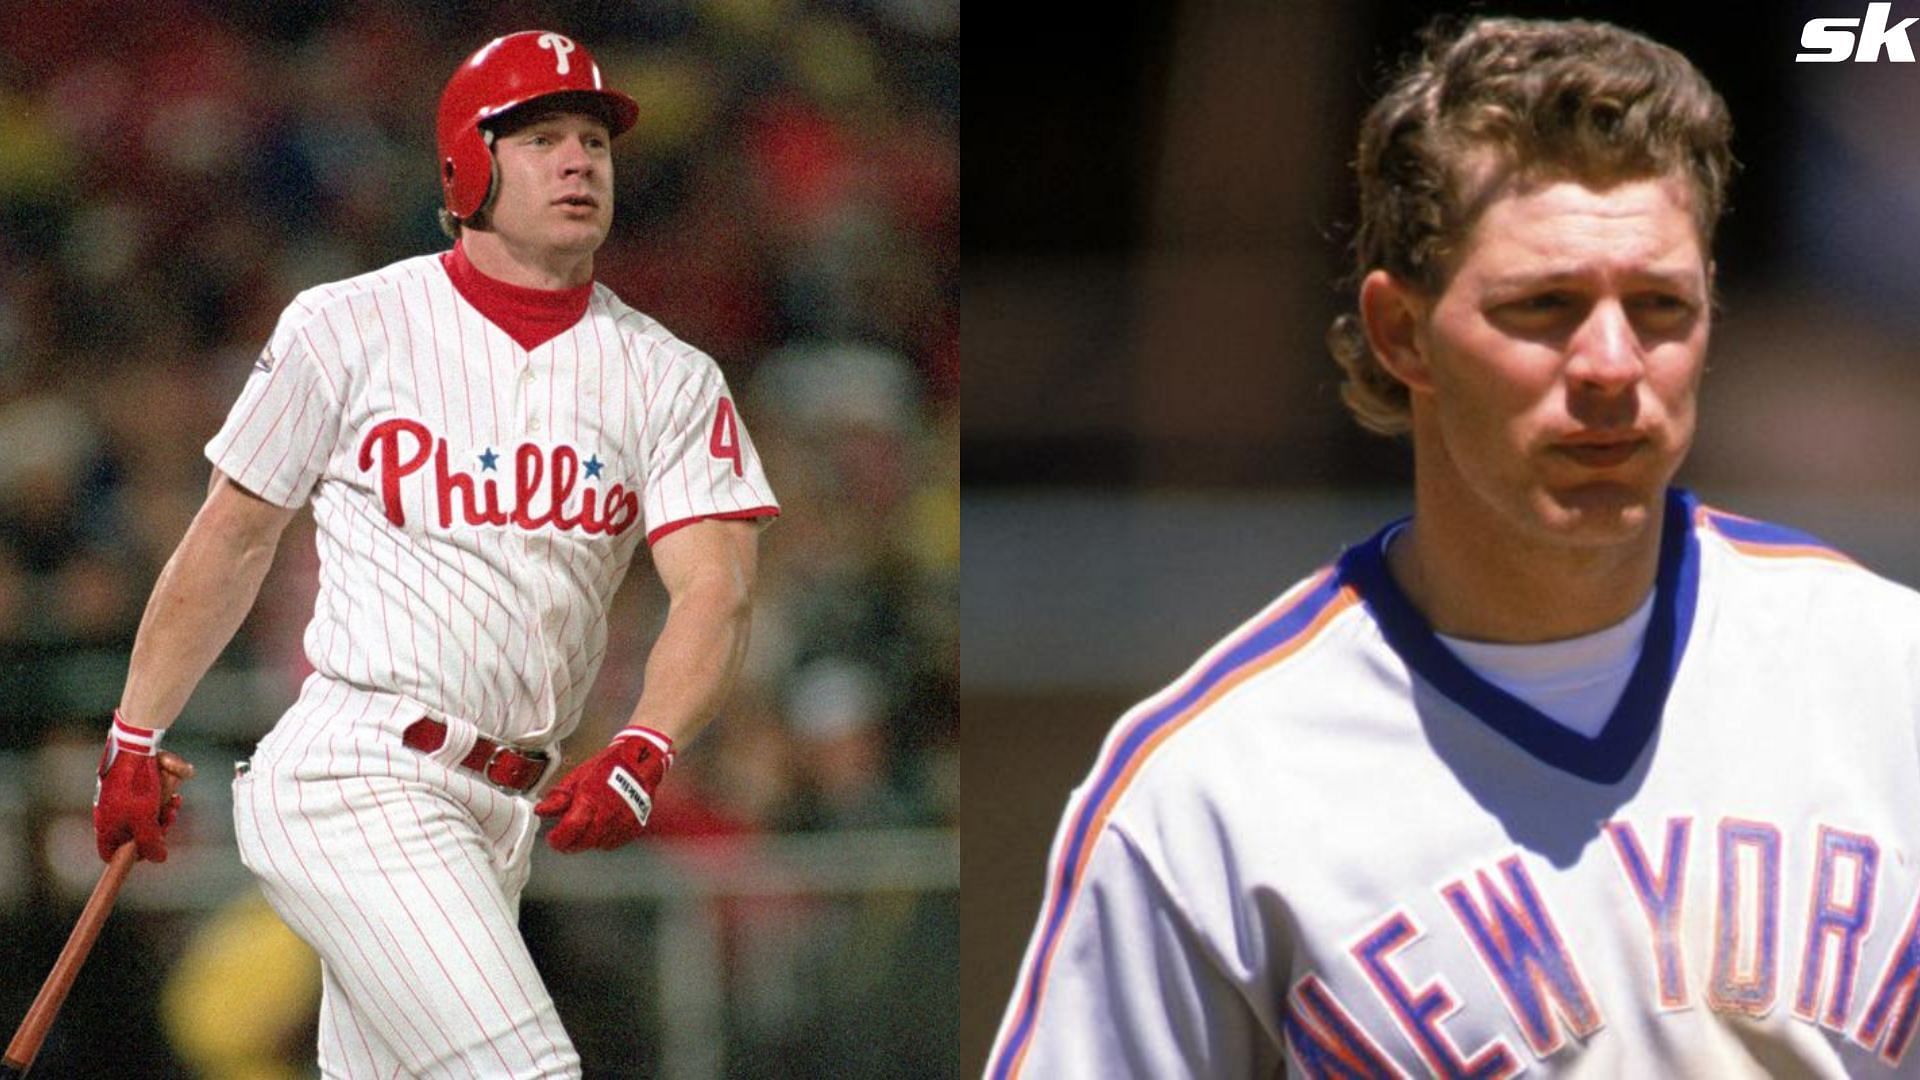 Controversial ex-MLB star, Lenny Dykstra adds twist to Twitter matchmaking bid for 28-year-old Philly sports devotee